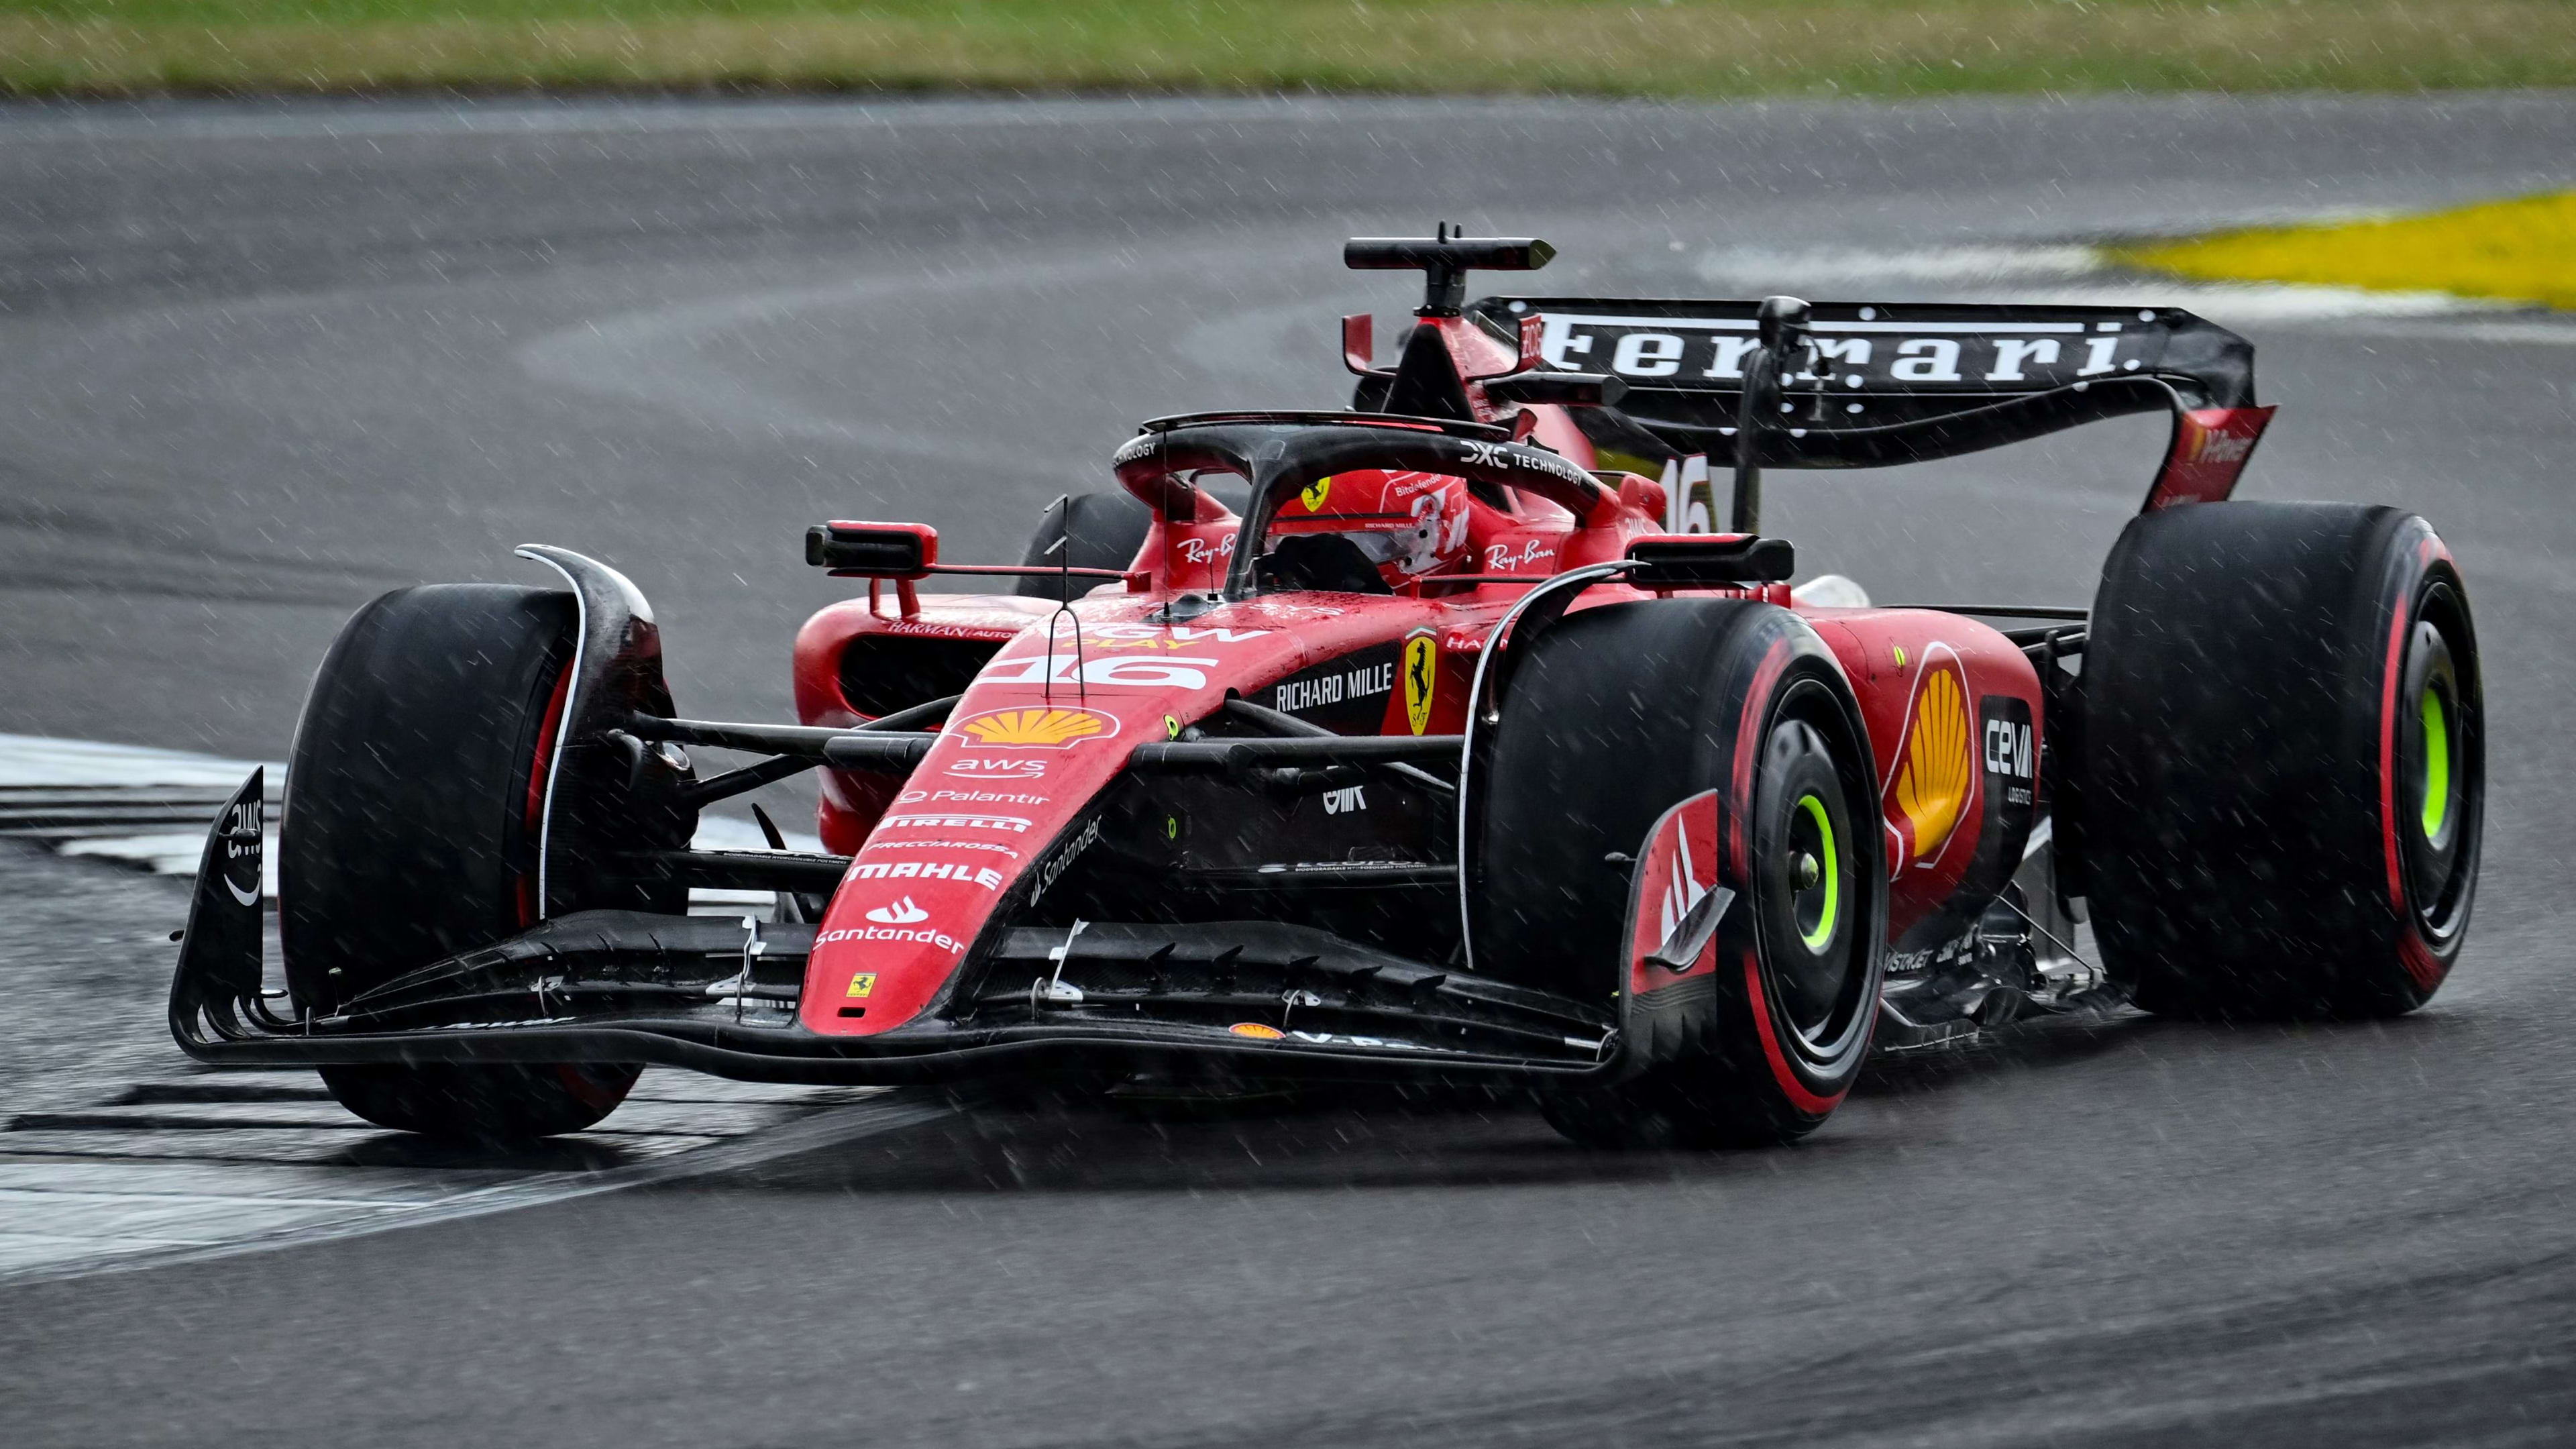 2023 British Grand Prix FP3 report and highlights Leclerc heads Albon and Alonso in FP3 at Silverstone as rain arrives Formula 1®